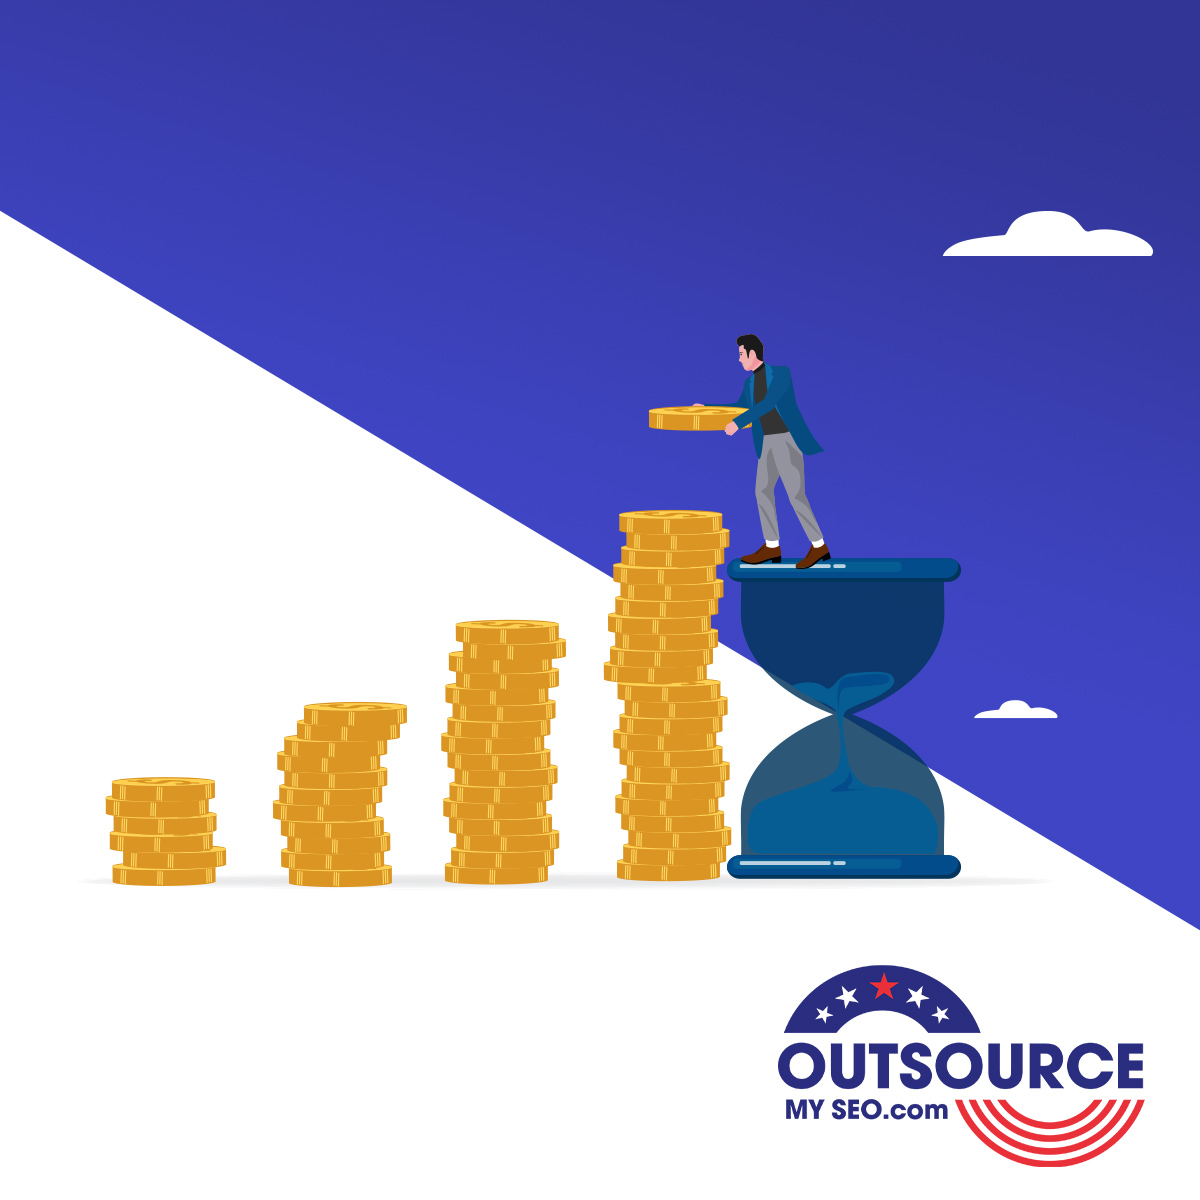 Unlock long-term growth by #OutsourcingSEO! It’s not just immediate relief; it's a strategic move for #MarketingAgencies looking to focus on strengths & excel. bit.ly/4bbD4FY #SEOStrategy #DigitalMarketing #GrowthHacking #AgencyLife #SuccessTips #SEOOutsourcing 🚀